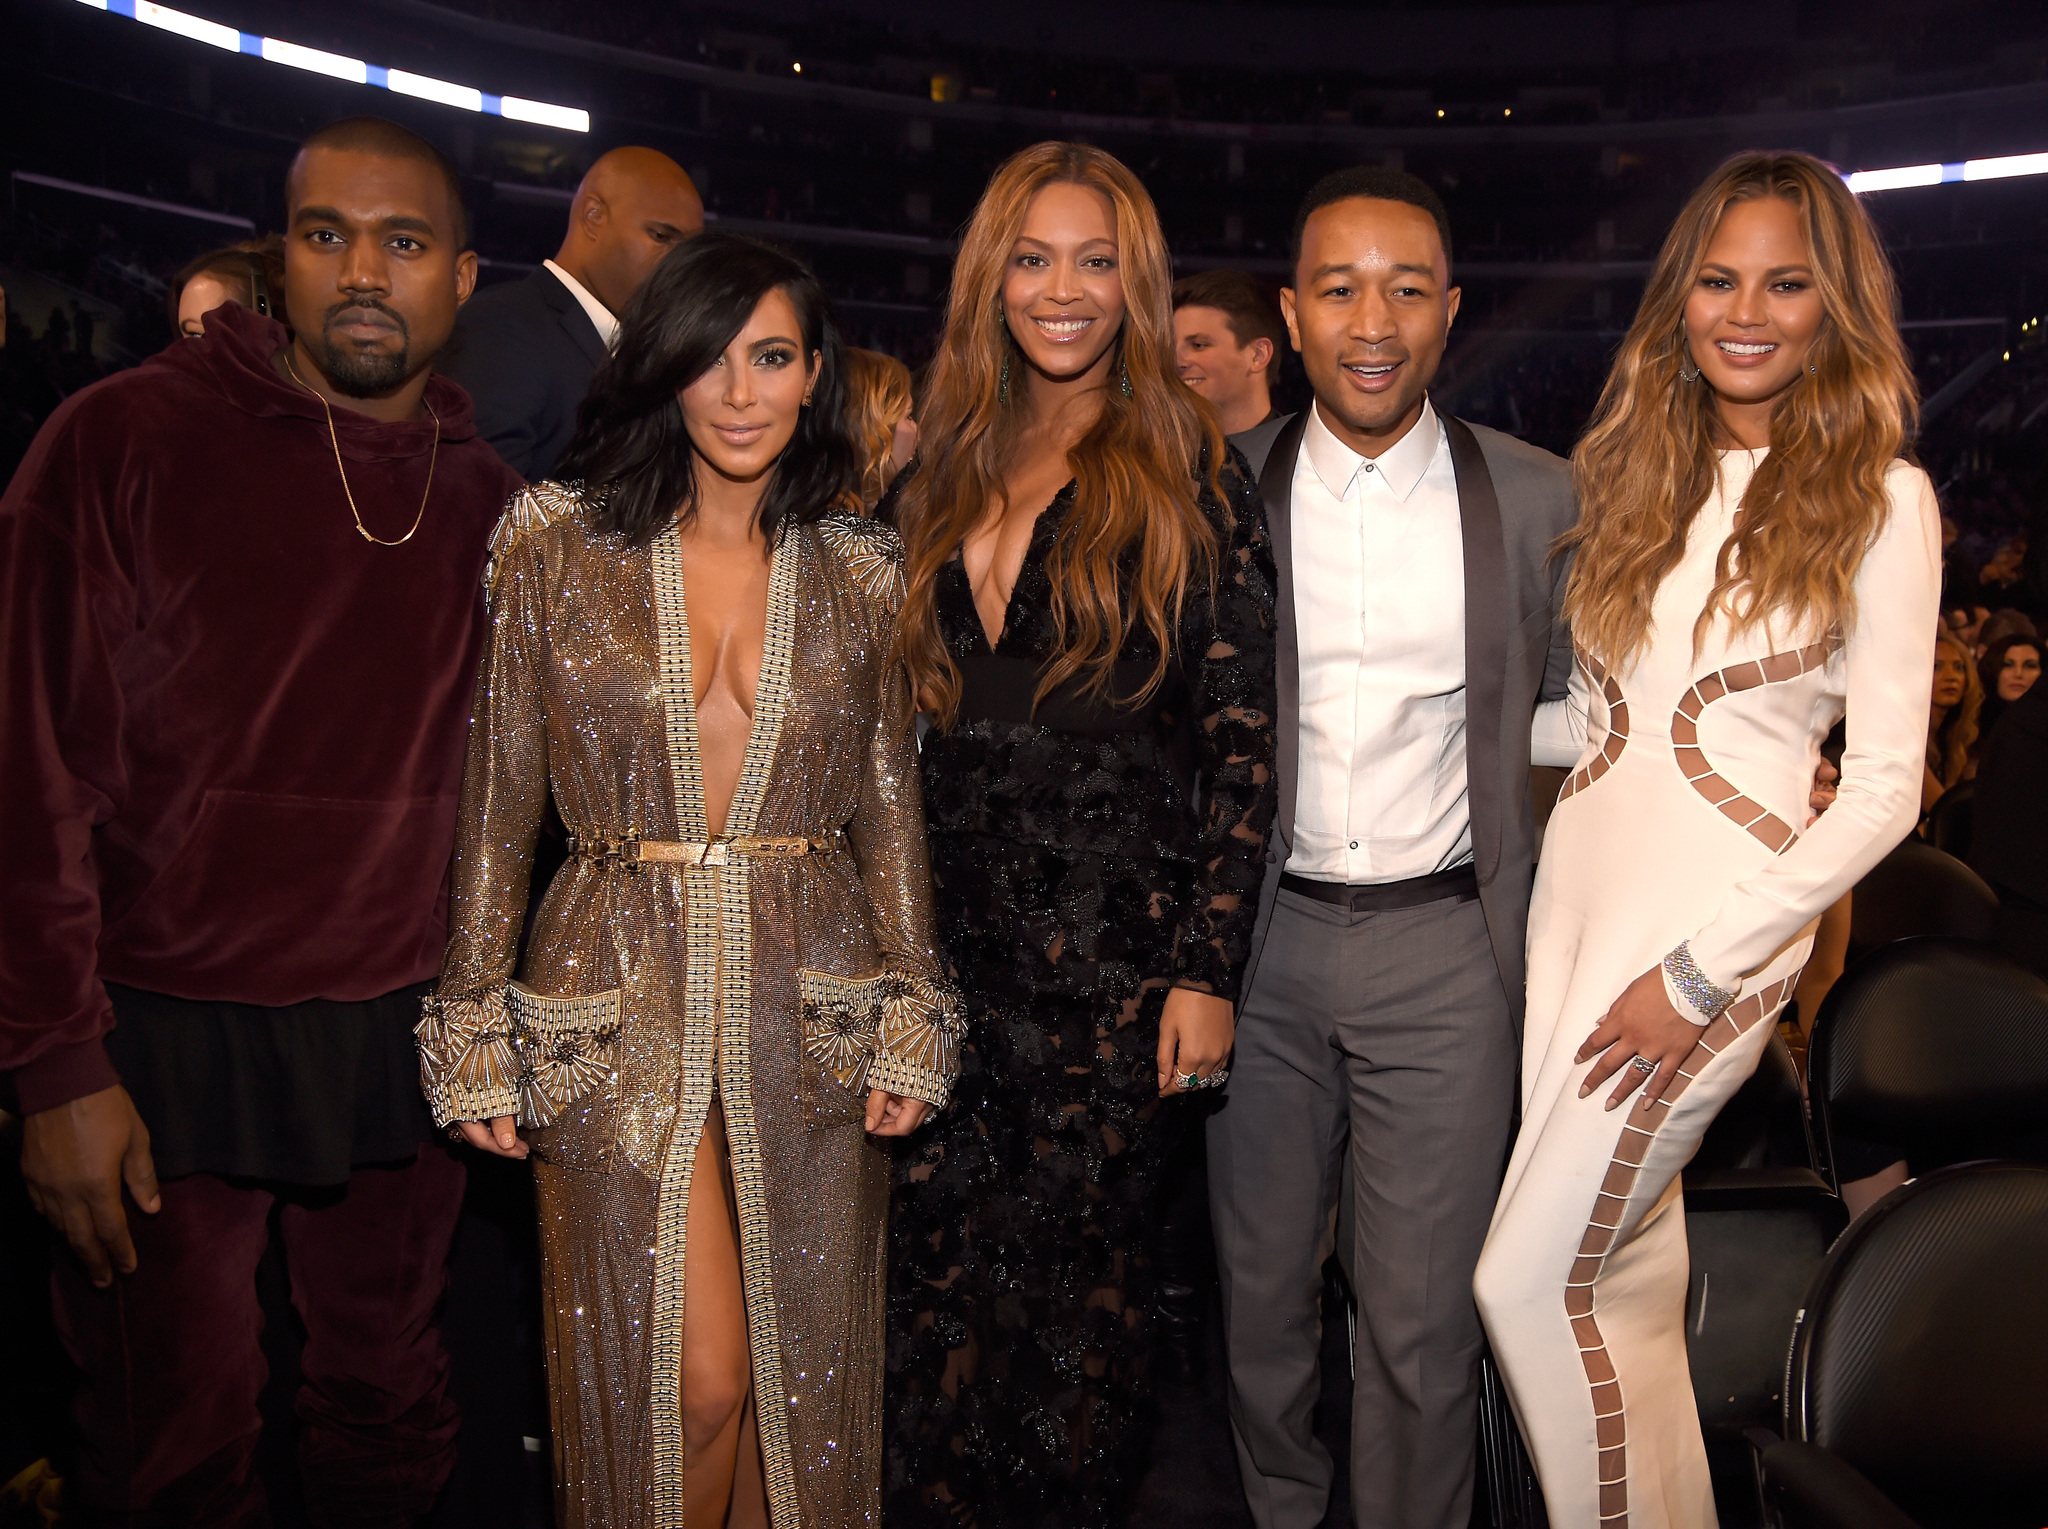 Beyoncé Knowles, Kanye West, John Legend, Kim Kardashian West and Chrissy Teigen at event of The 57th Annual Grammy Awards (2015)